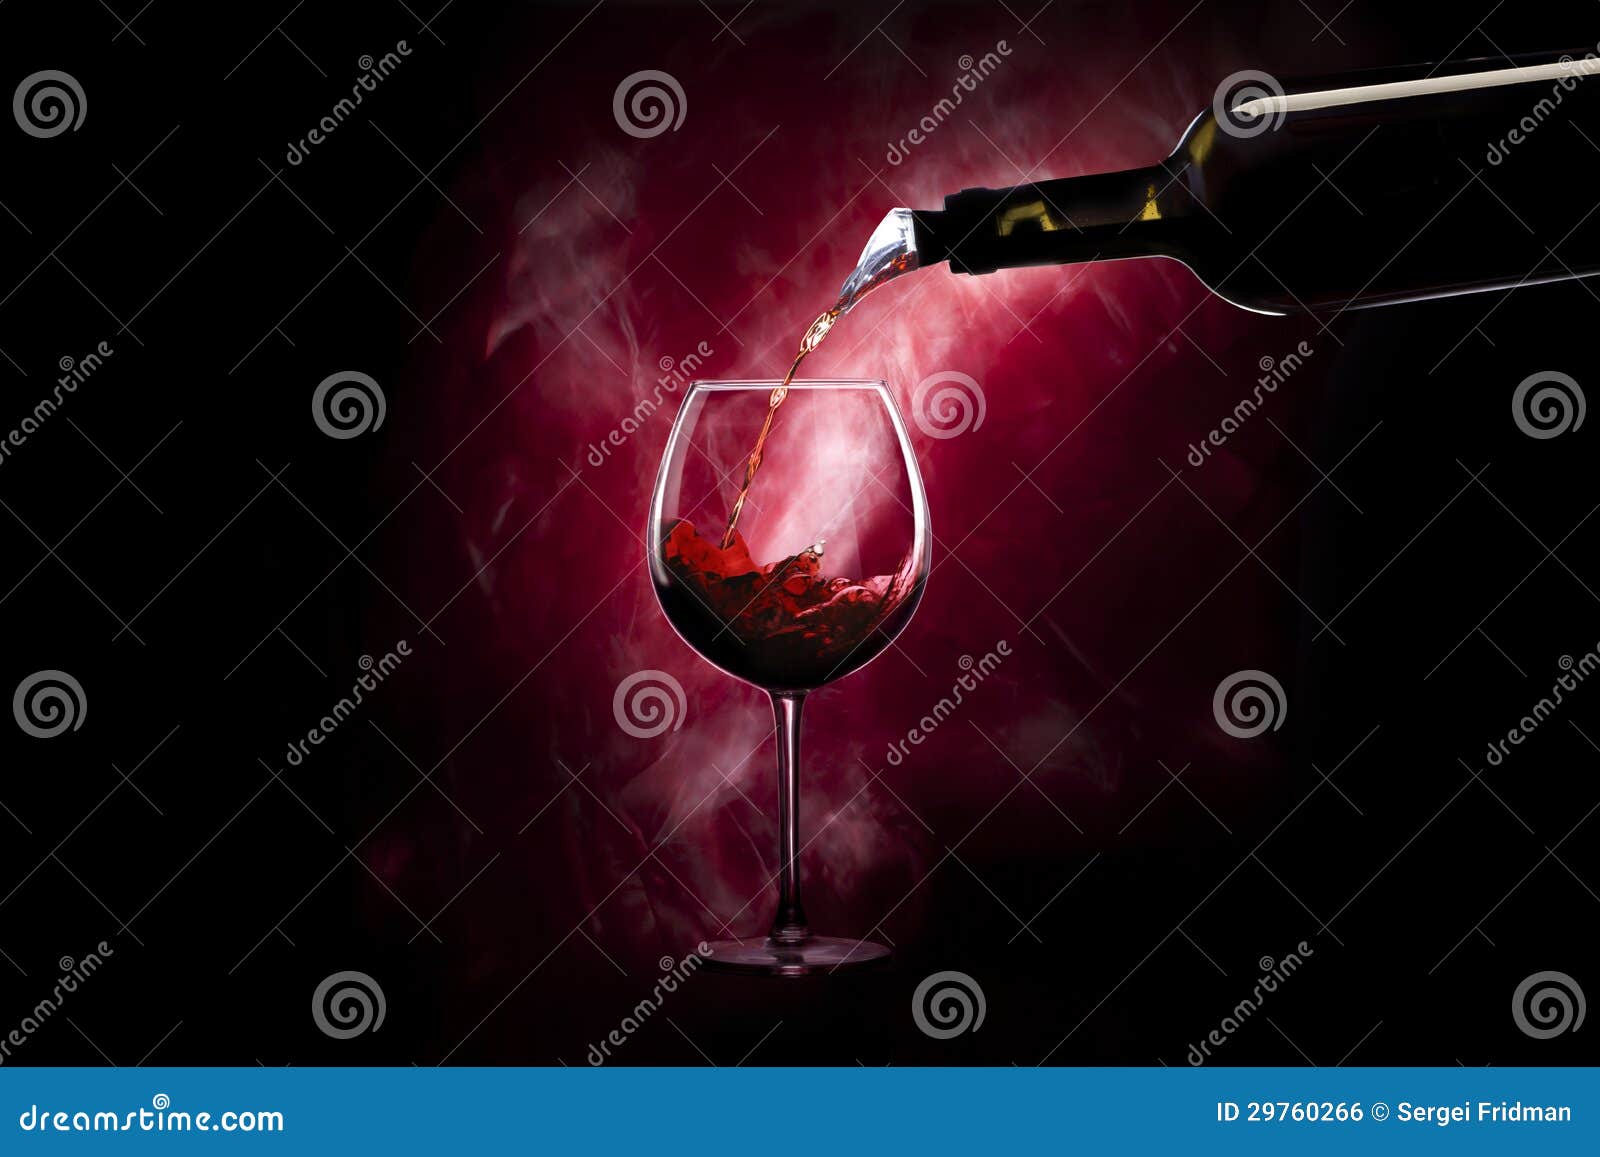 wineglass with bottle